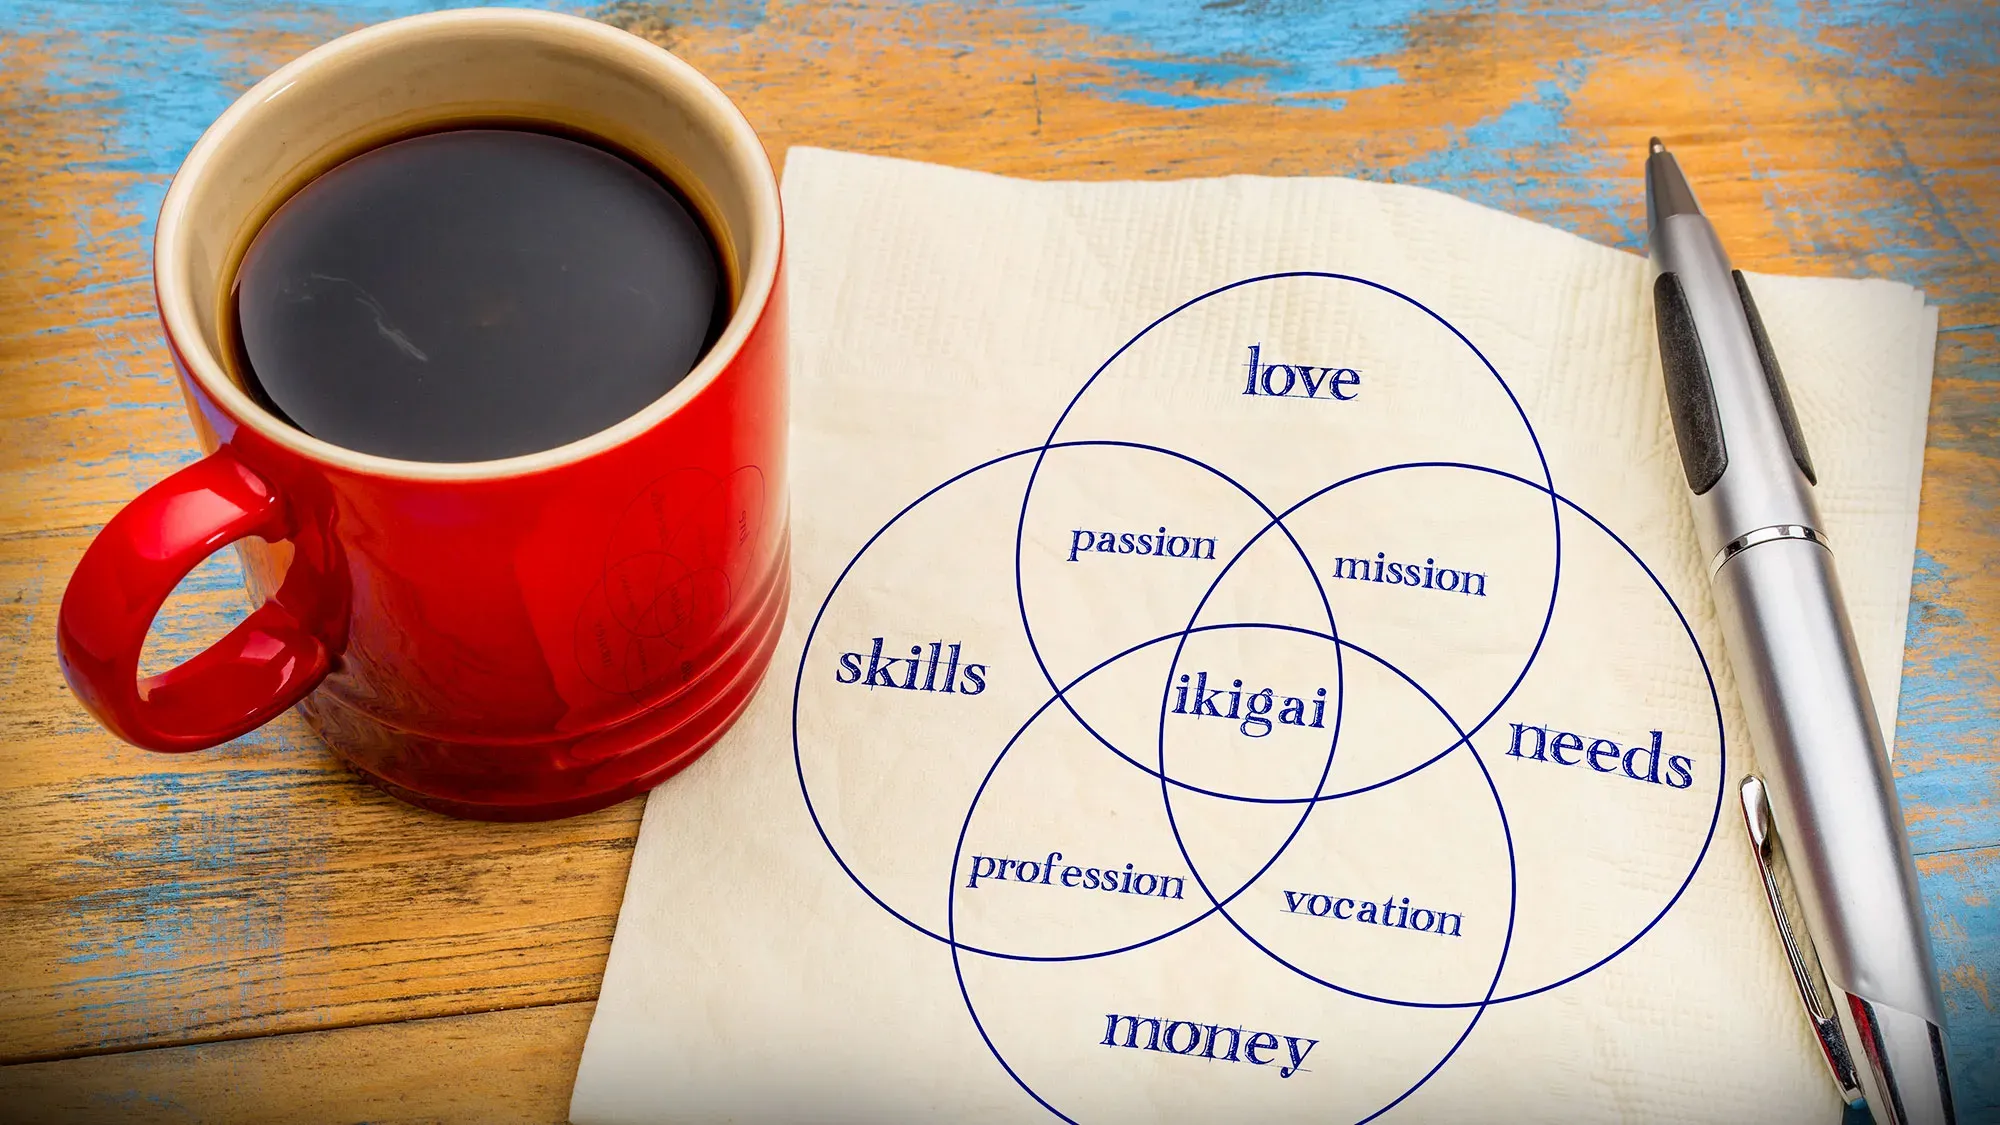 Can Japanese Ikigai Transform the Meaning of Your Work?